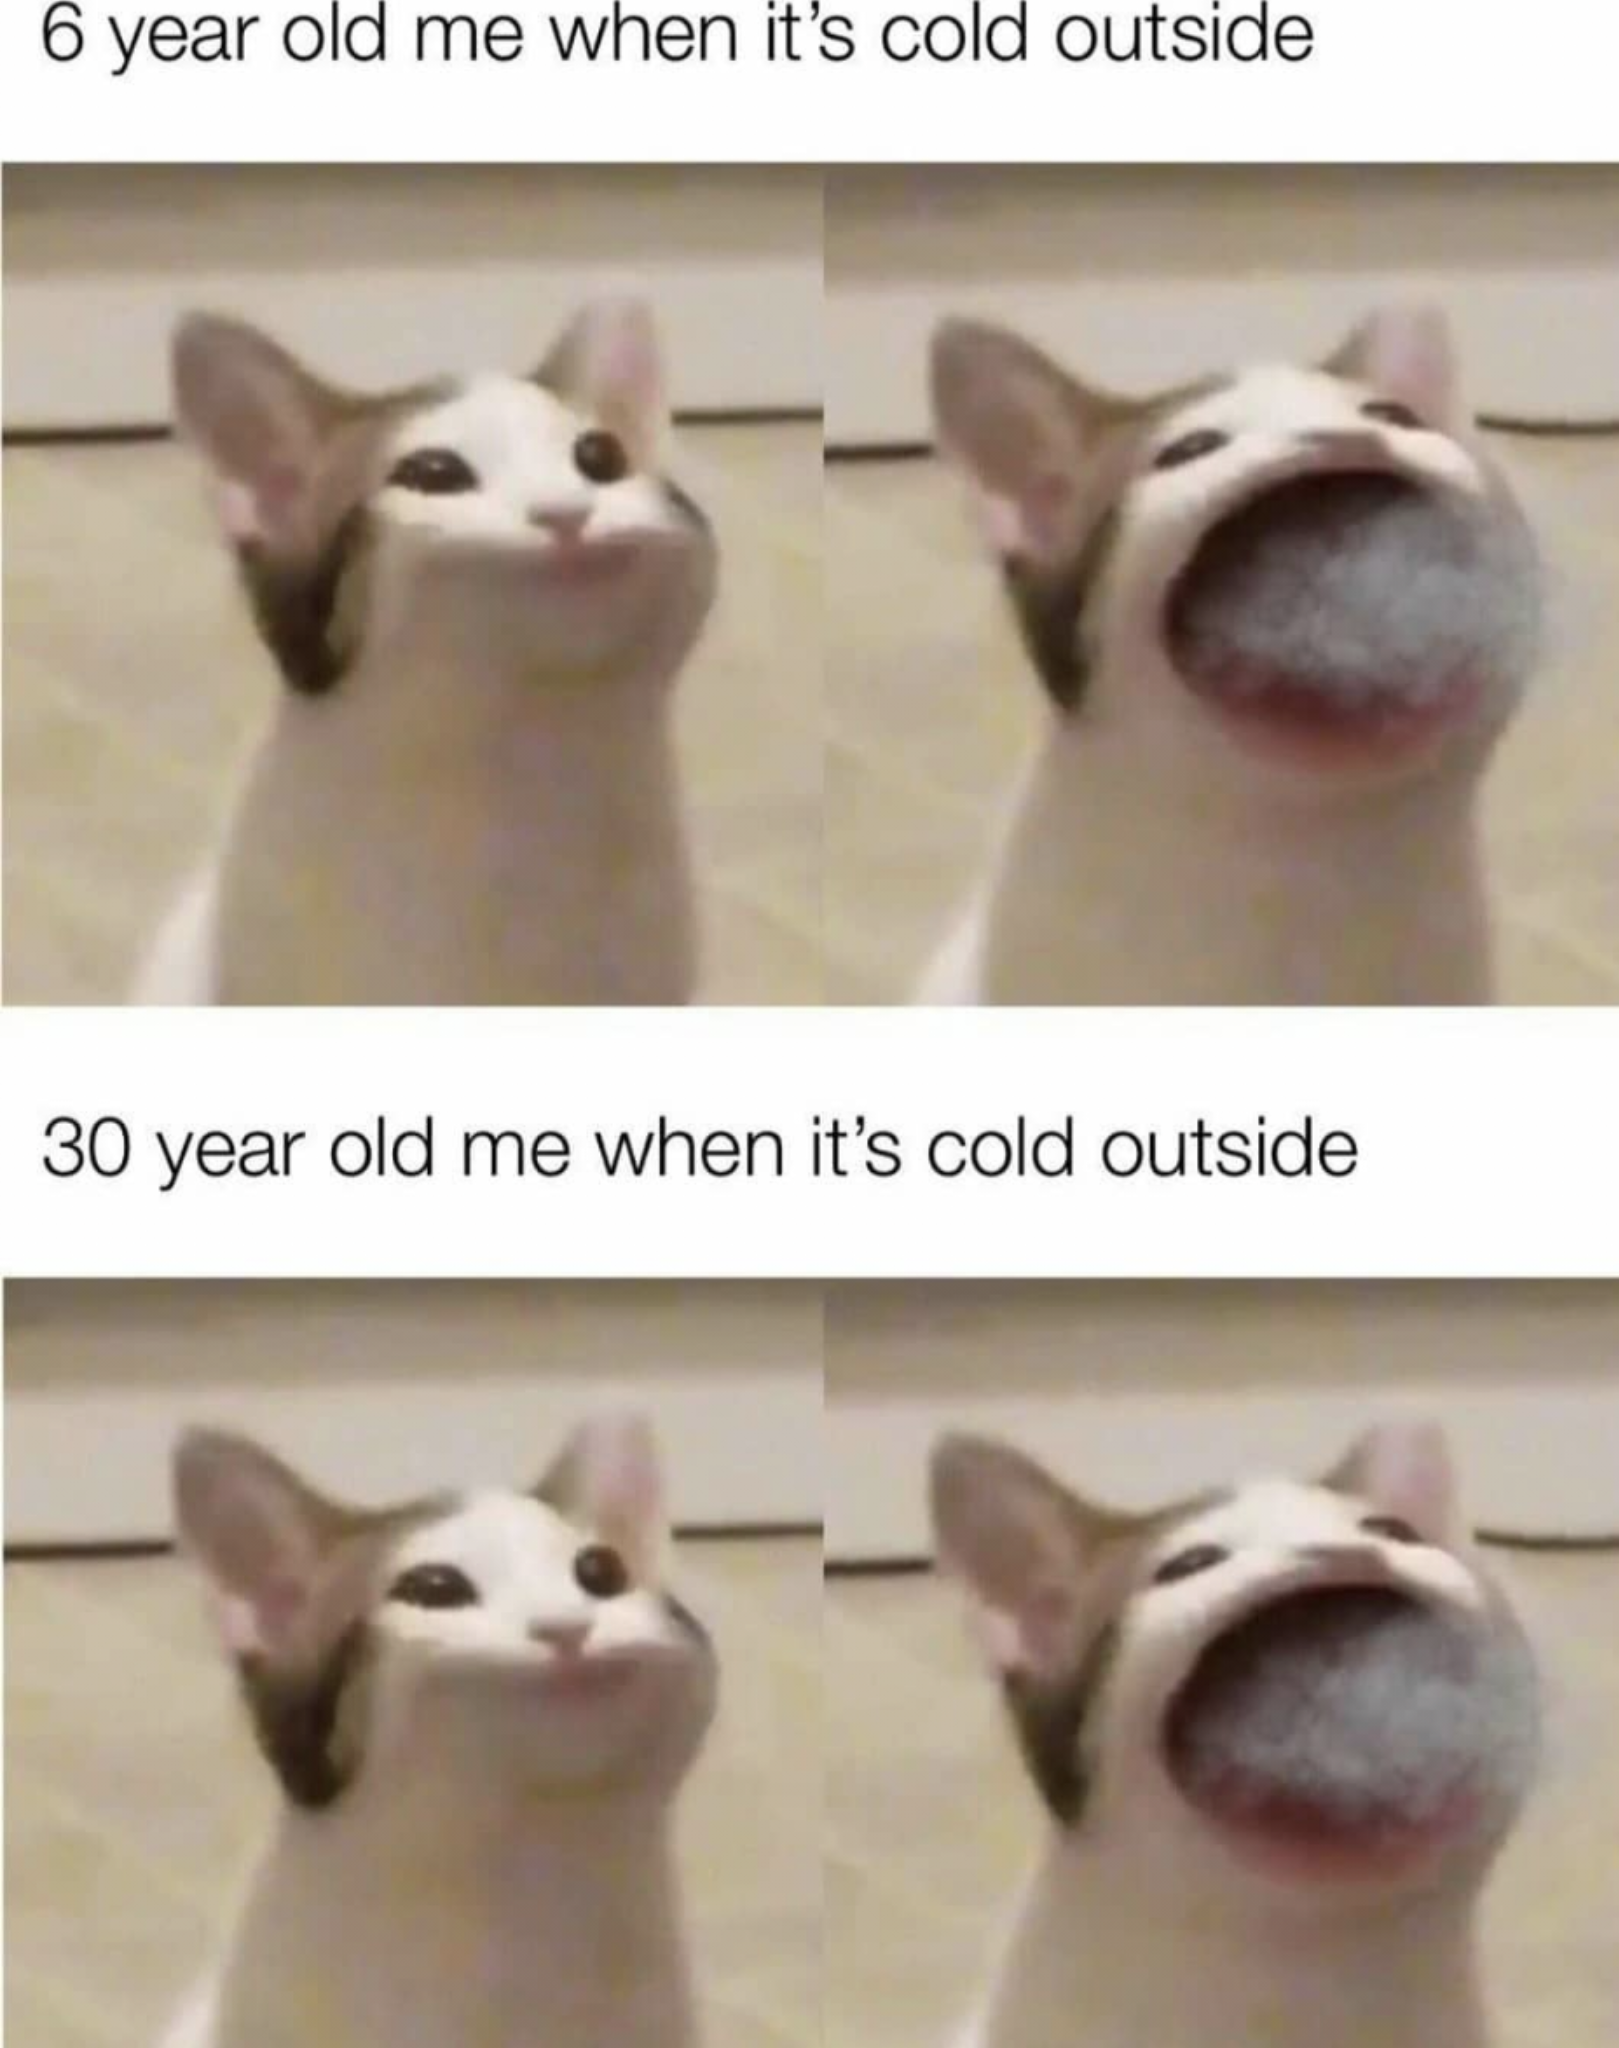 funny memes - wide mouth cat meme - 6 year old me when it's cold outside 30 year old me when it's cold outside